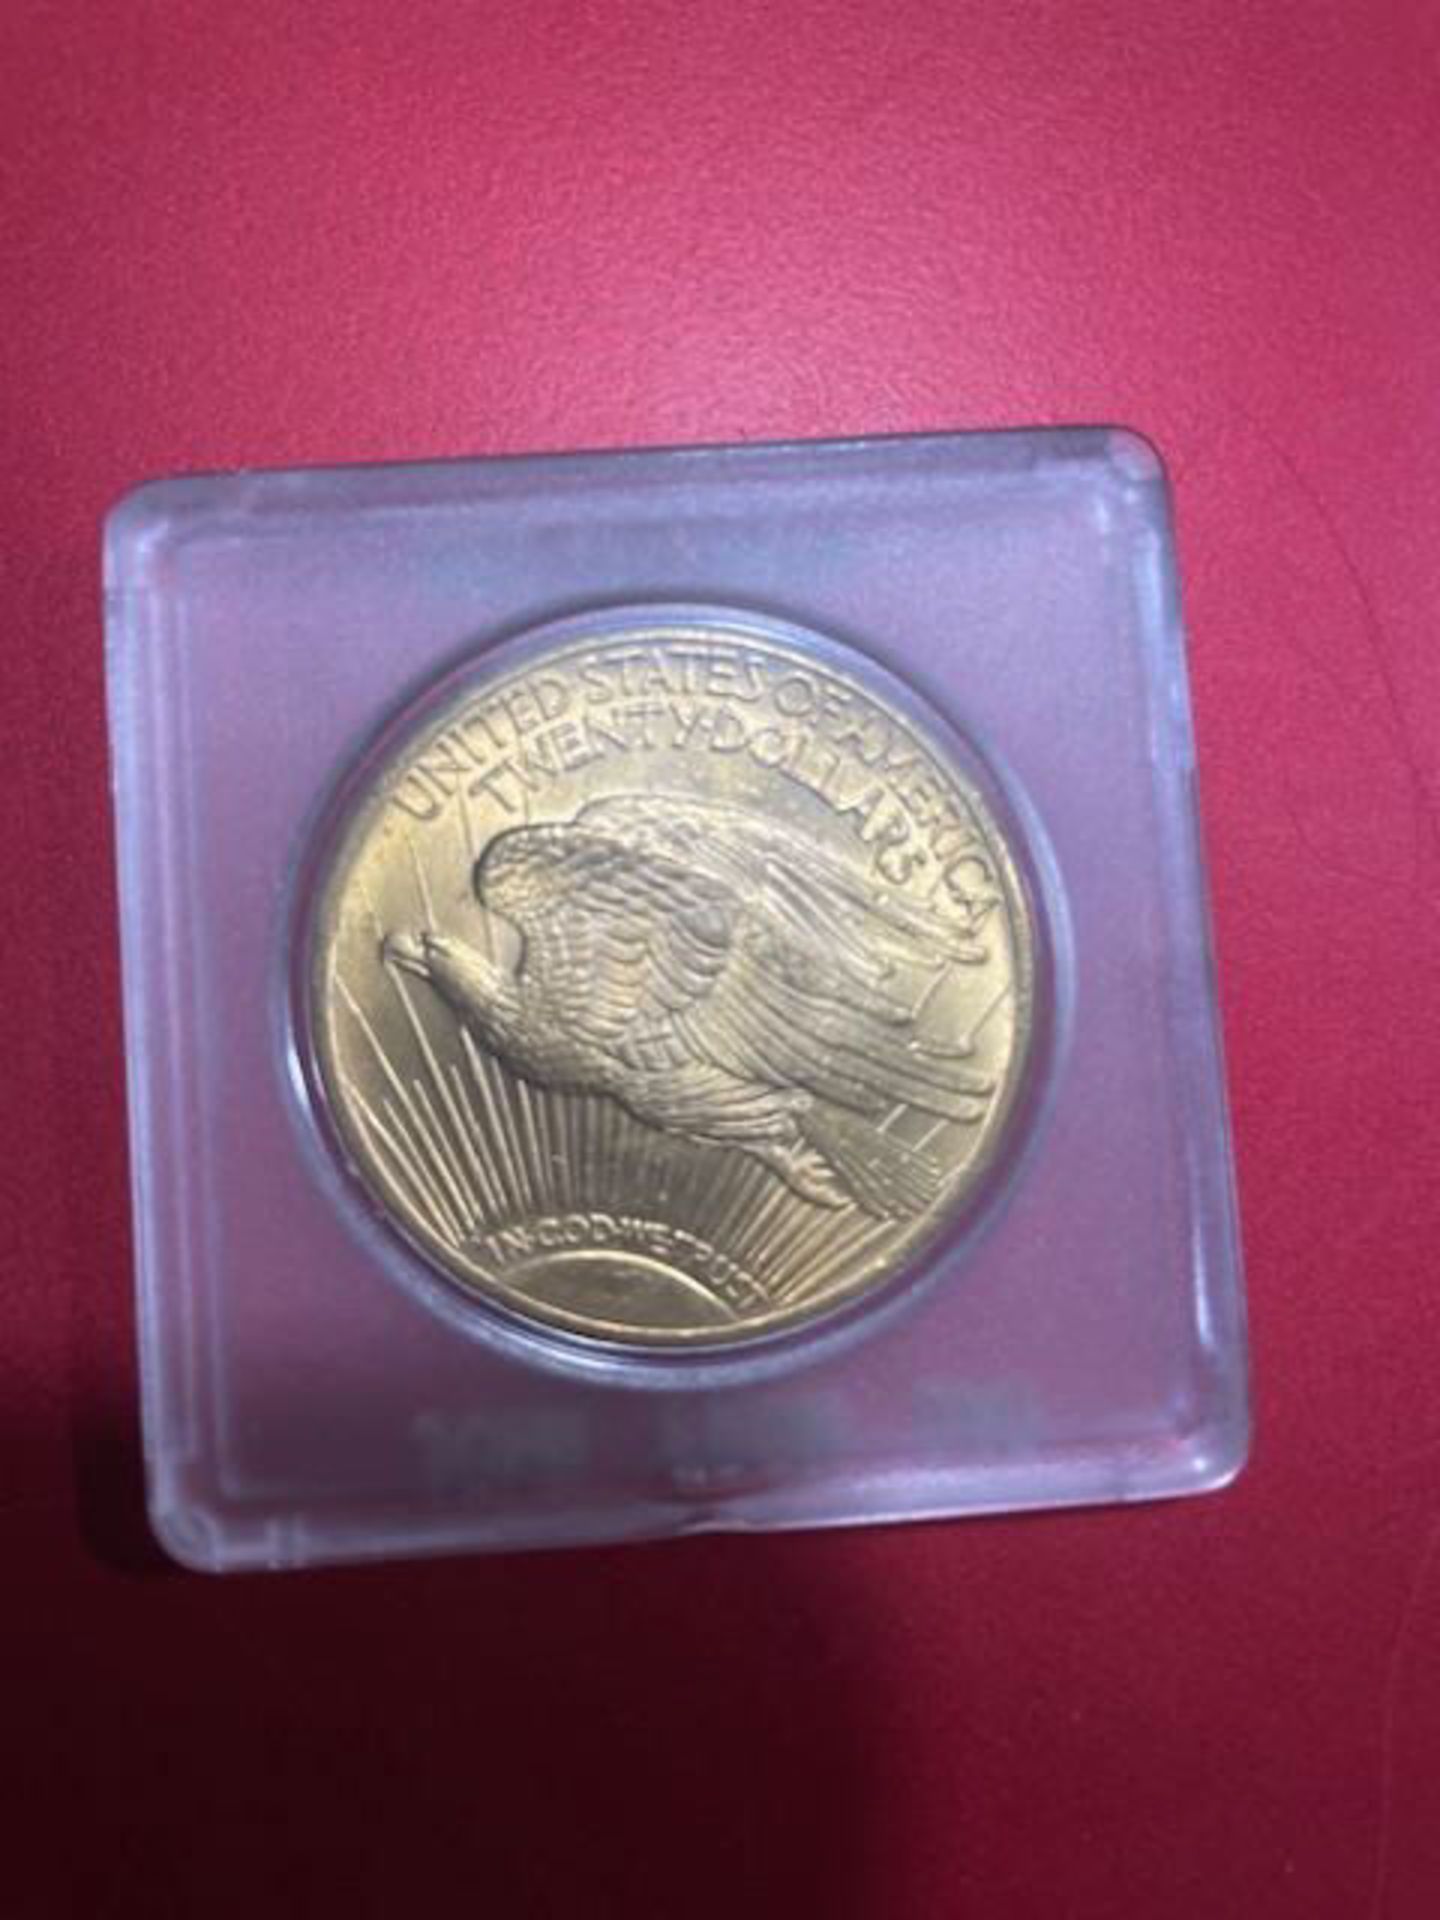 1928 St. Gaudens Double Eagle $20 Gold Coin - Image 12 of 12